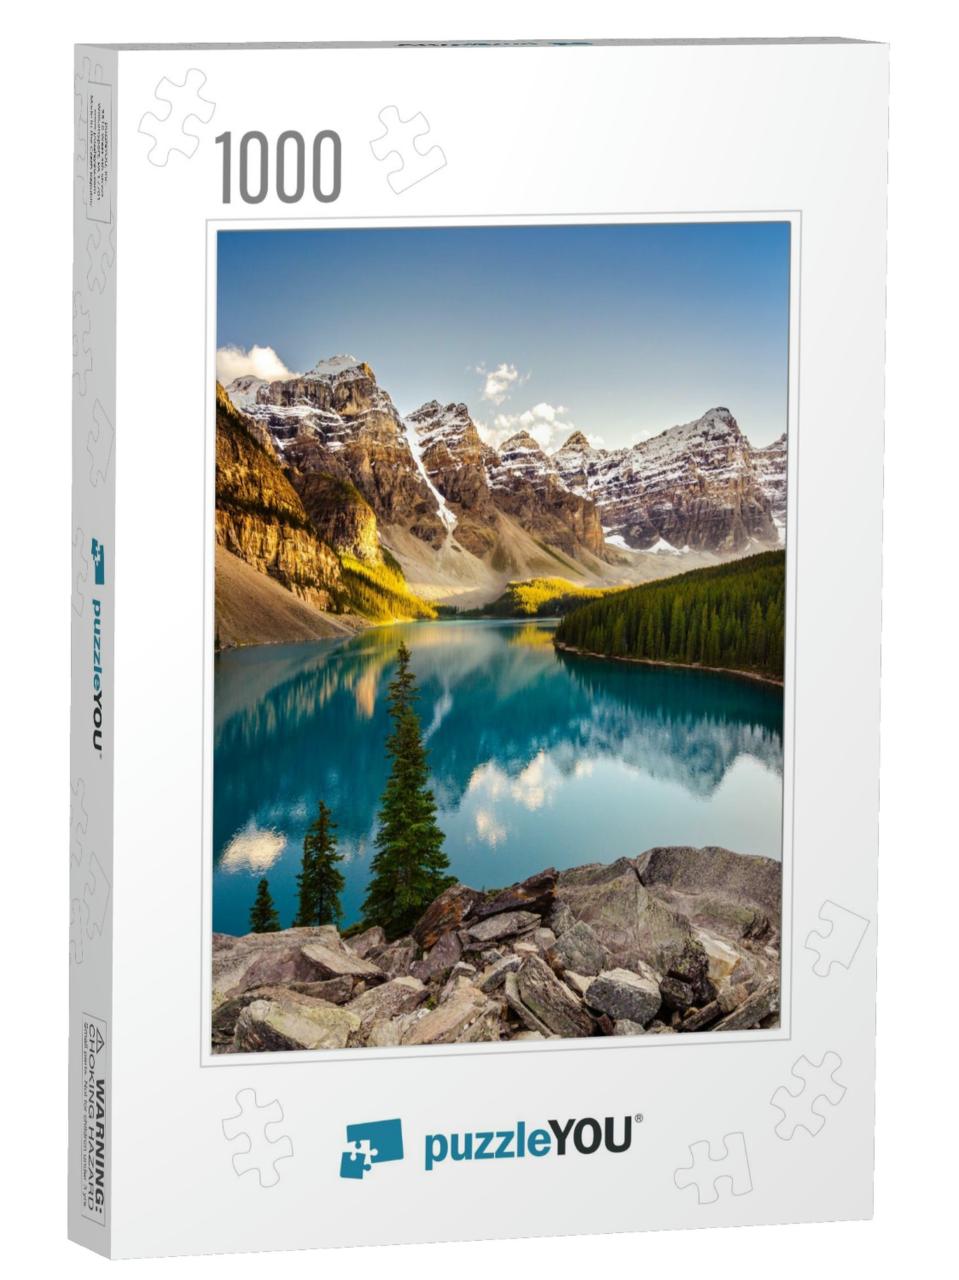 Landscape View of Moraine Lake & Mountain Range At Sunset... Jigsaw Puzzle with 1000 pieces